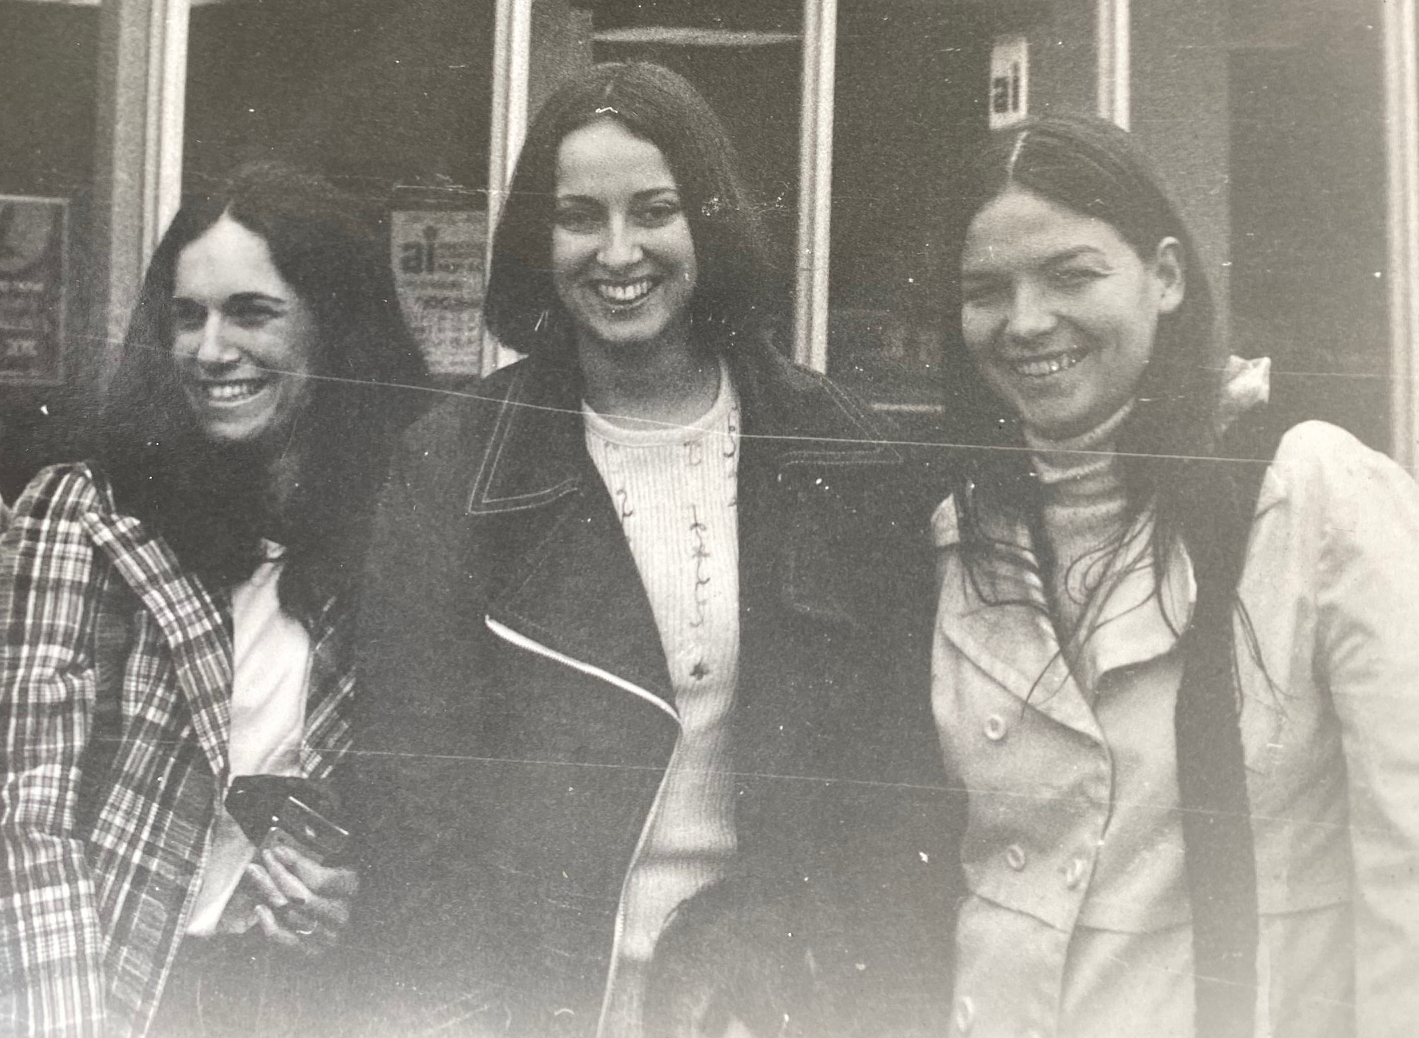 Marjorie Stuckle stands with two other students, all smiling, in a black-and-white photo from 1973. The student at left is wearing a checked jacket and white top; Stuckle is wearing a dark jacket and white top; and the third student is wearing a light colored trench coat over a light turtle neck. 